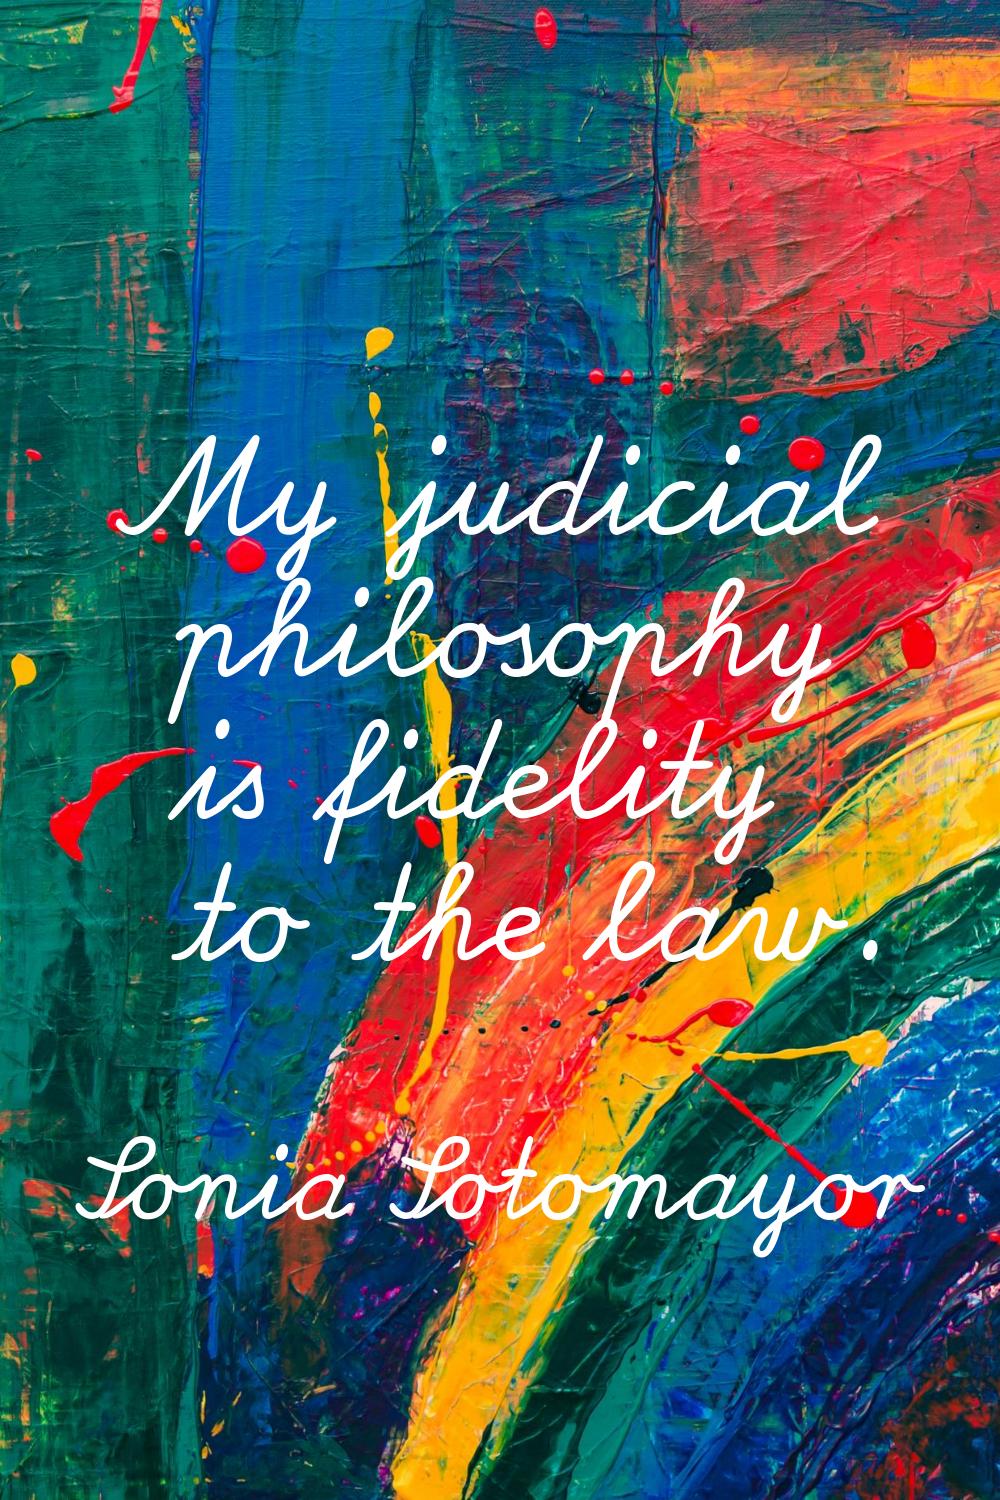 My judicial philosophy is fidelity to the law.